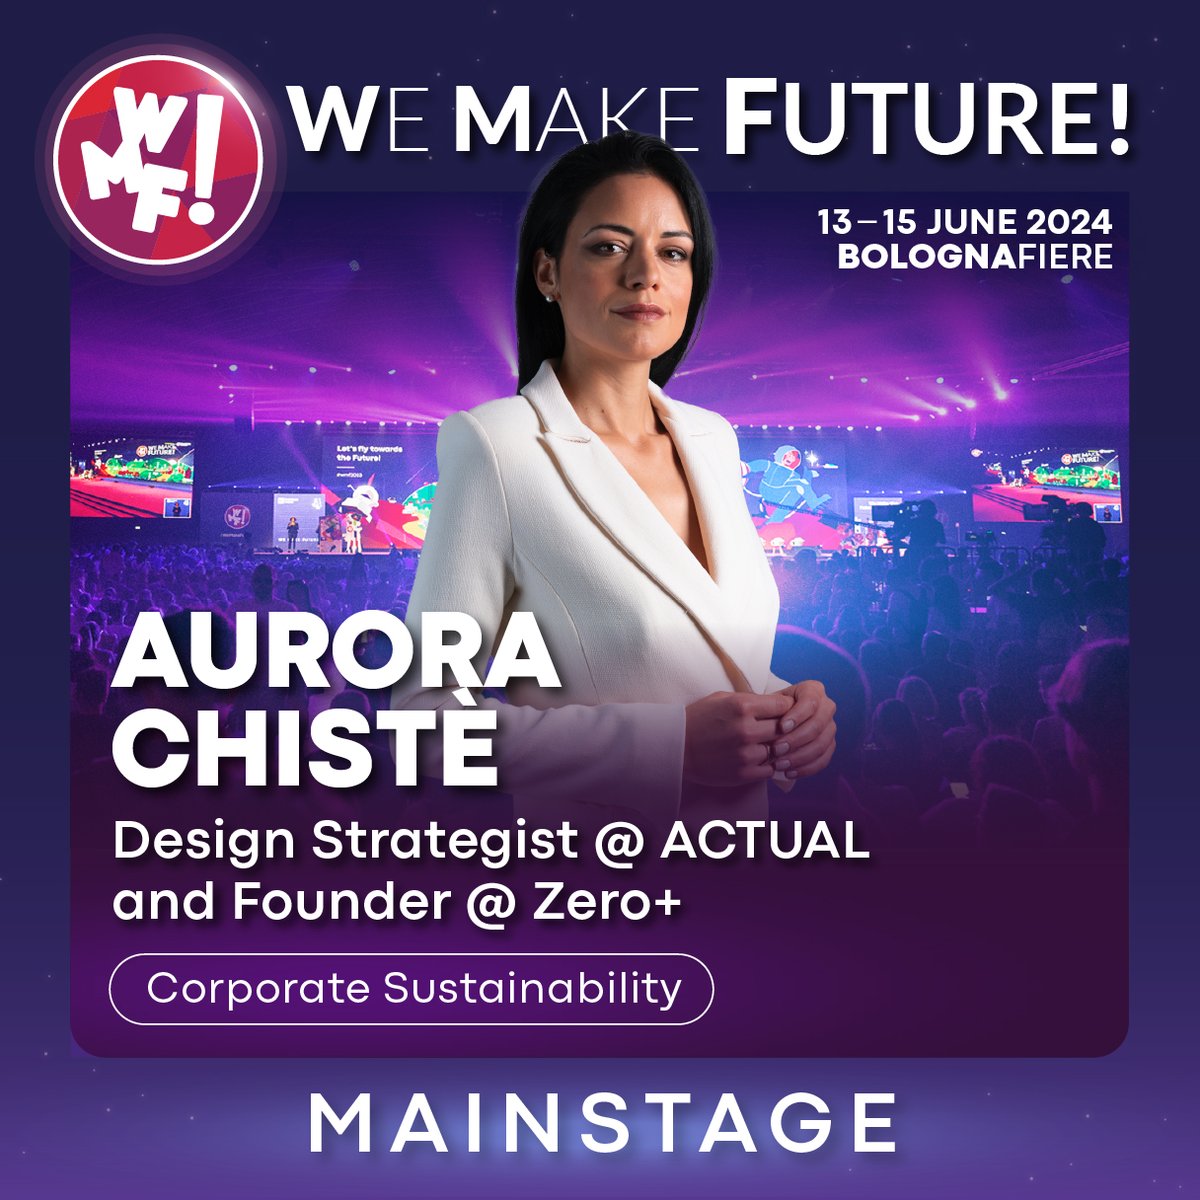 🌍On the Mainstage of #WMF2024, @TwittAurora will bring her dedication to leveraging innovation for social and environmental impact, in a speech focused on Corporate sustainability and Fresh Water Crisis. en.wemakefuture.it/s/65eae1cf1068… #WeMakeFuture, from June 13th to 15th, BolognaFiere